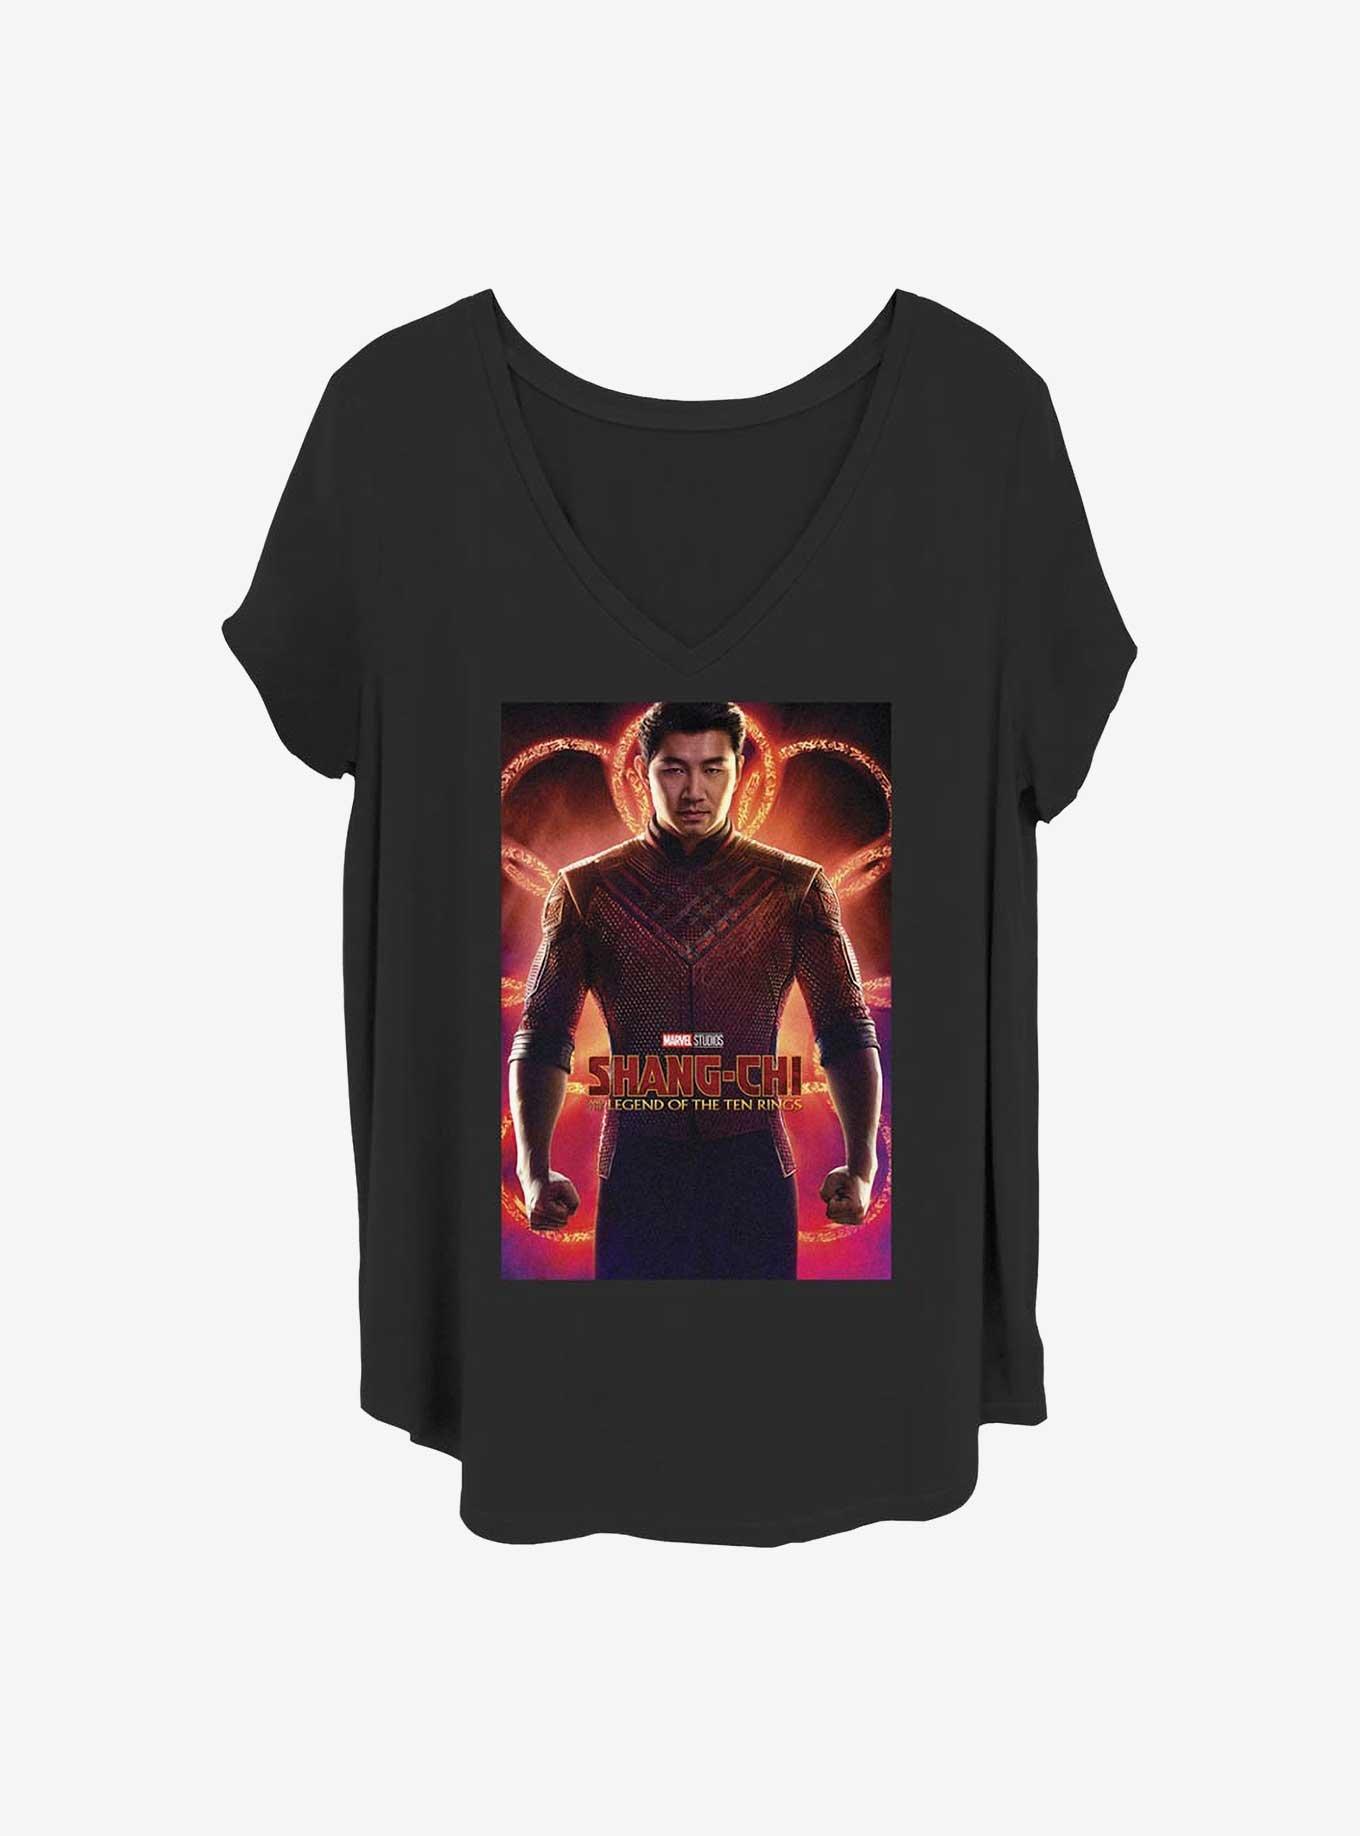 Marvel Shang-Chi and the Legend of the Ten Rings Poster Girls T-Shirt Plus Size, BLACK, hi-res